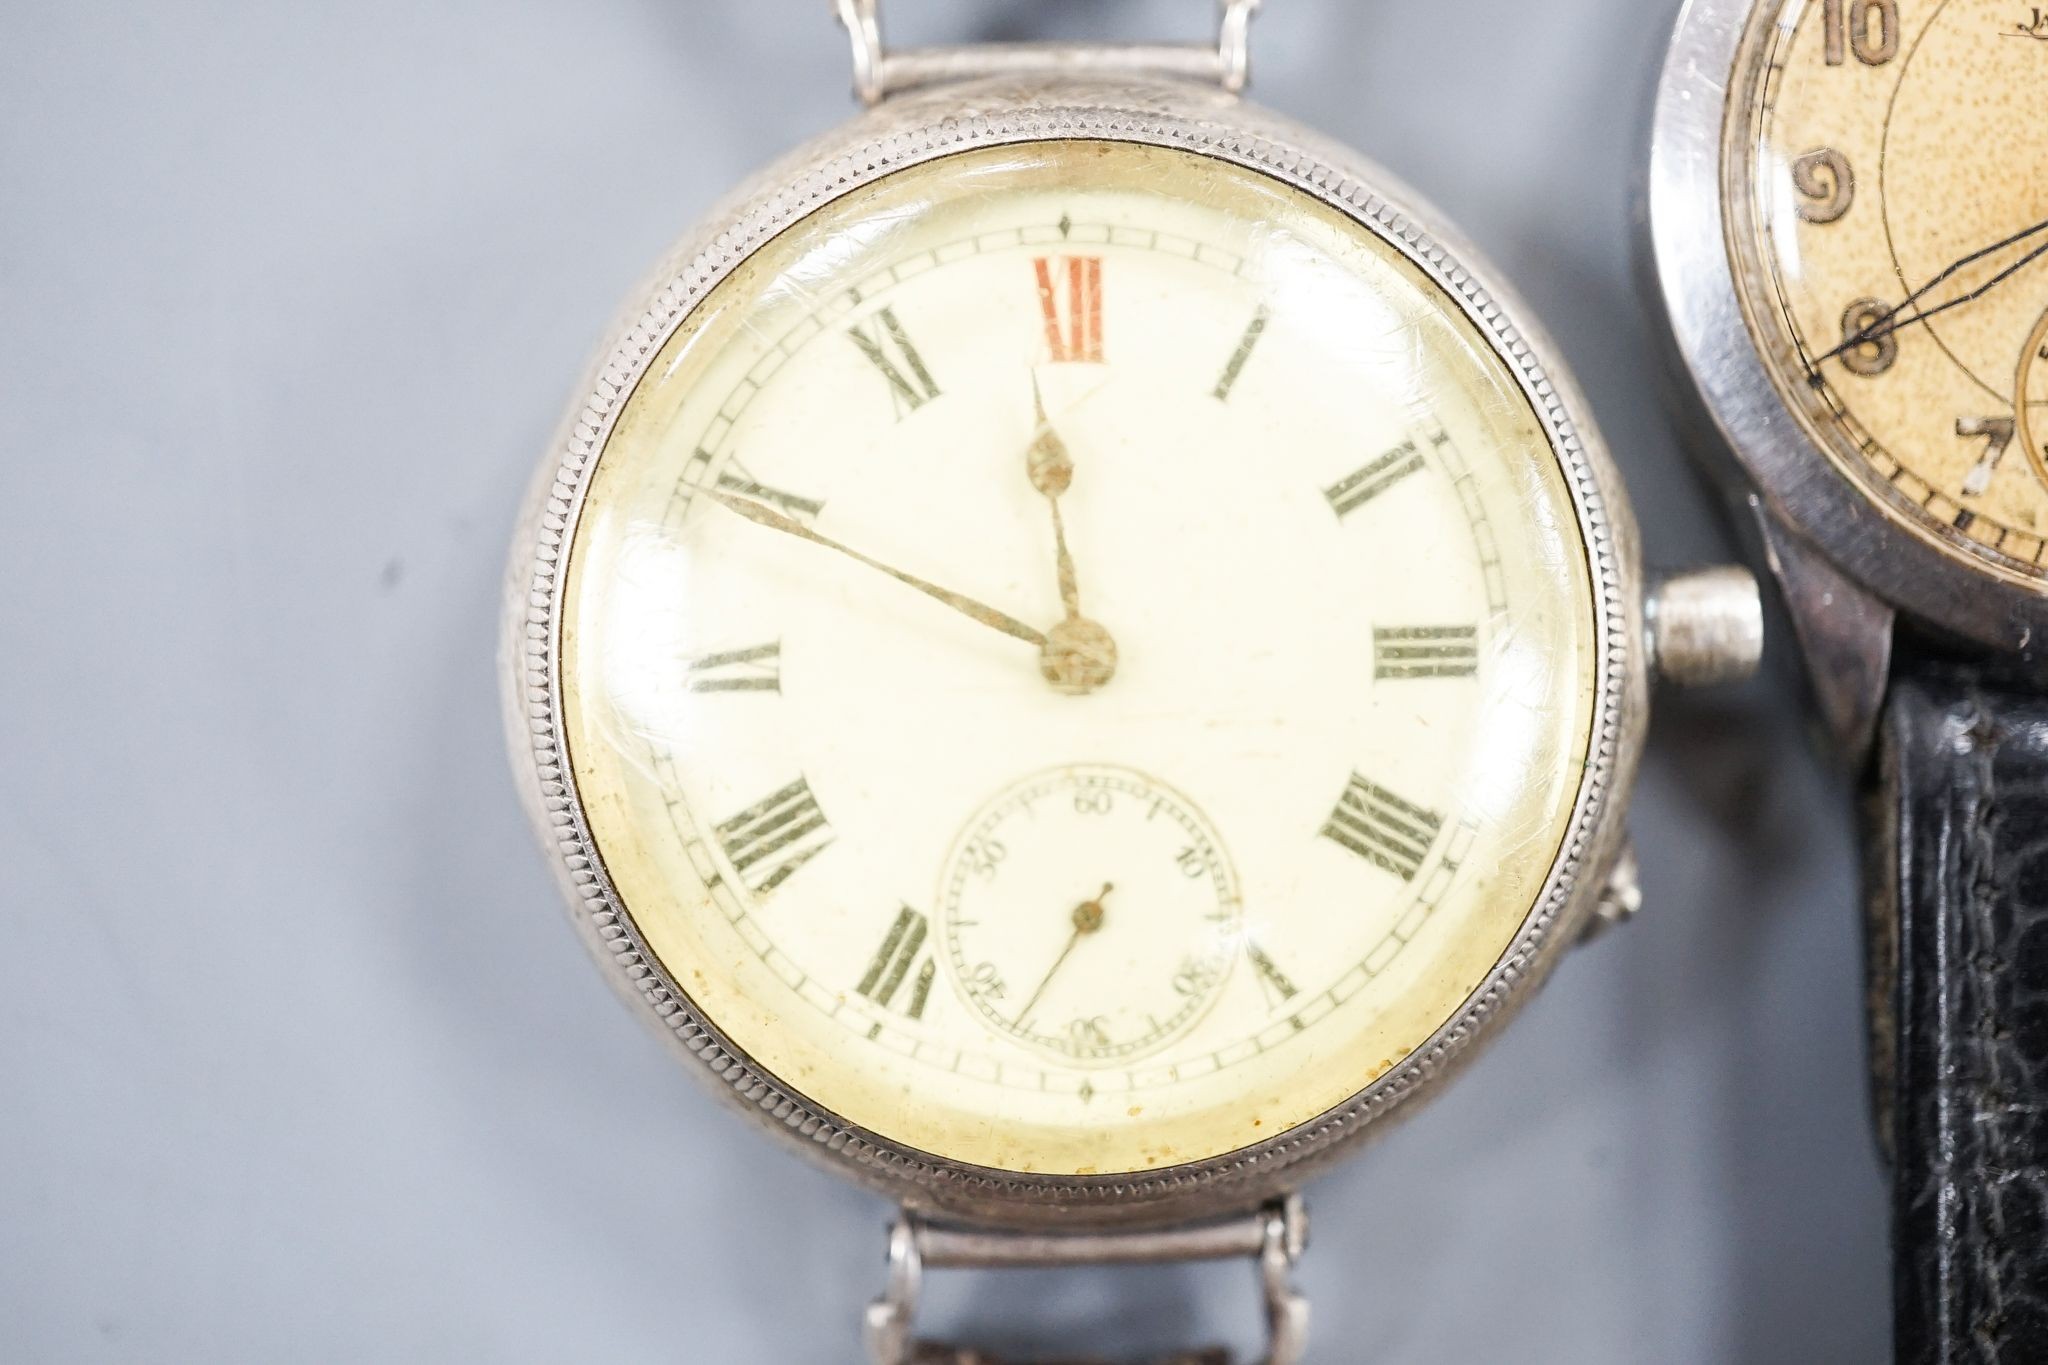 A gentleman's stainless steel Jaeger LeCoultre manual wind wrist watch, case back numbered 64765, on associated strap and a white metal fob watch, now mounted as a wrist watch(a.f.).